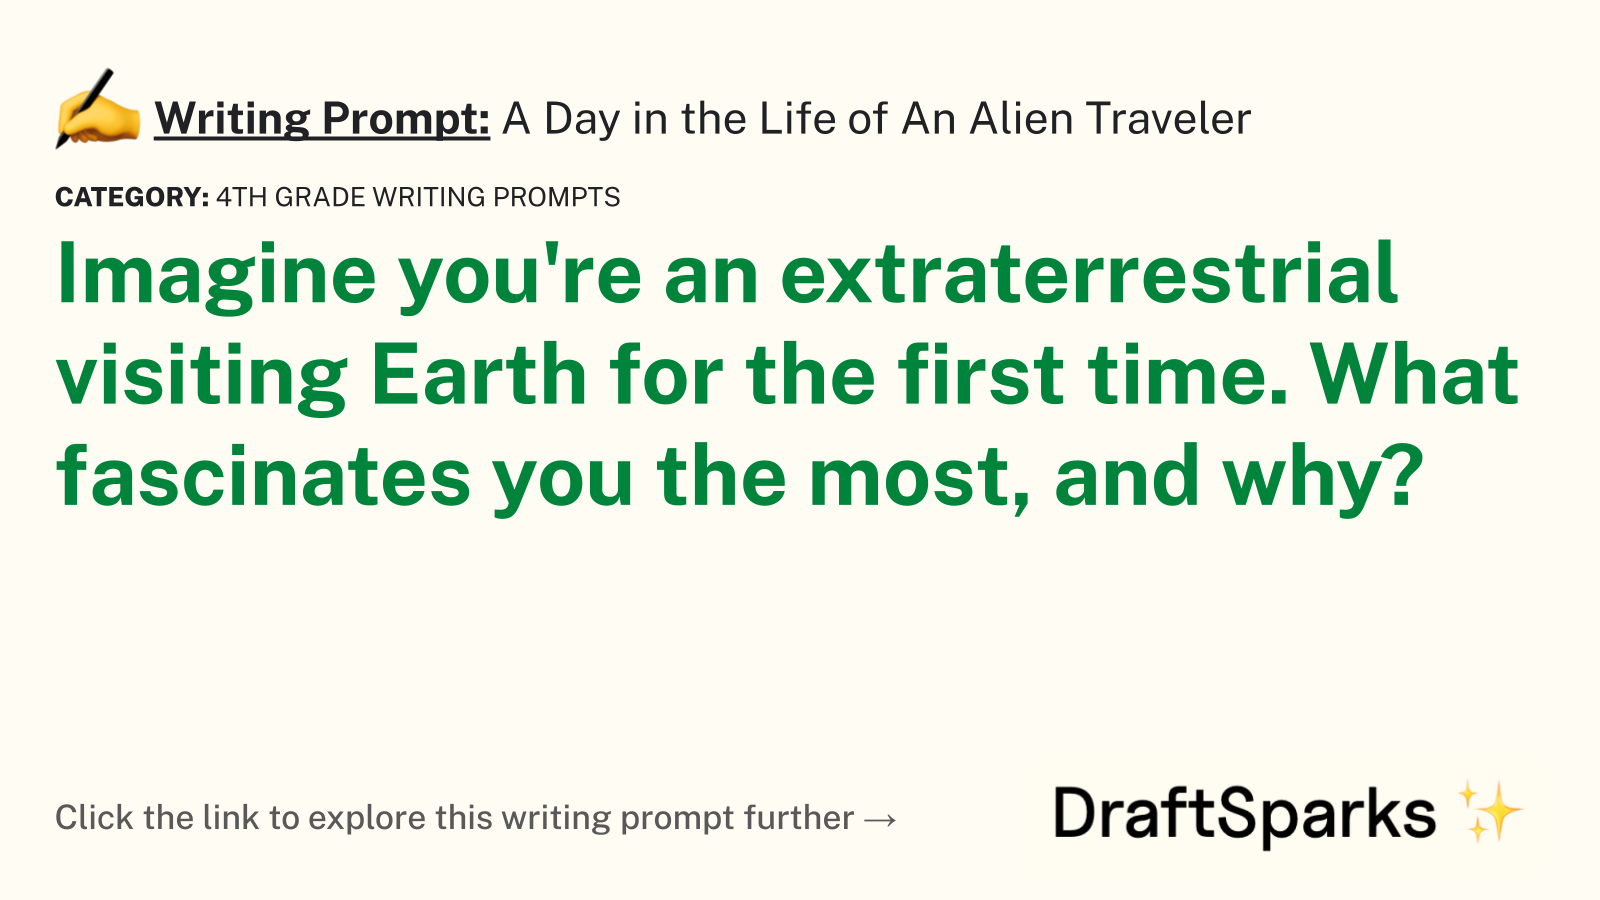 A Day in the Life of An Alien Traveler